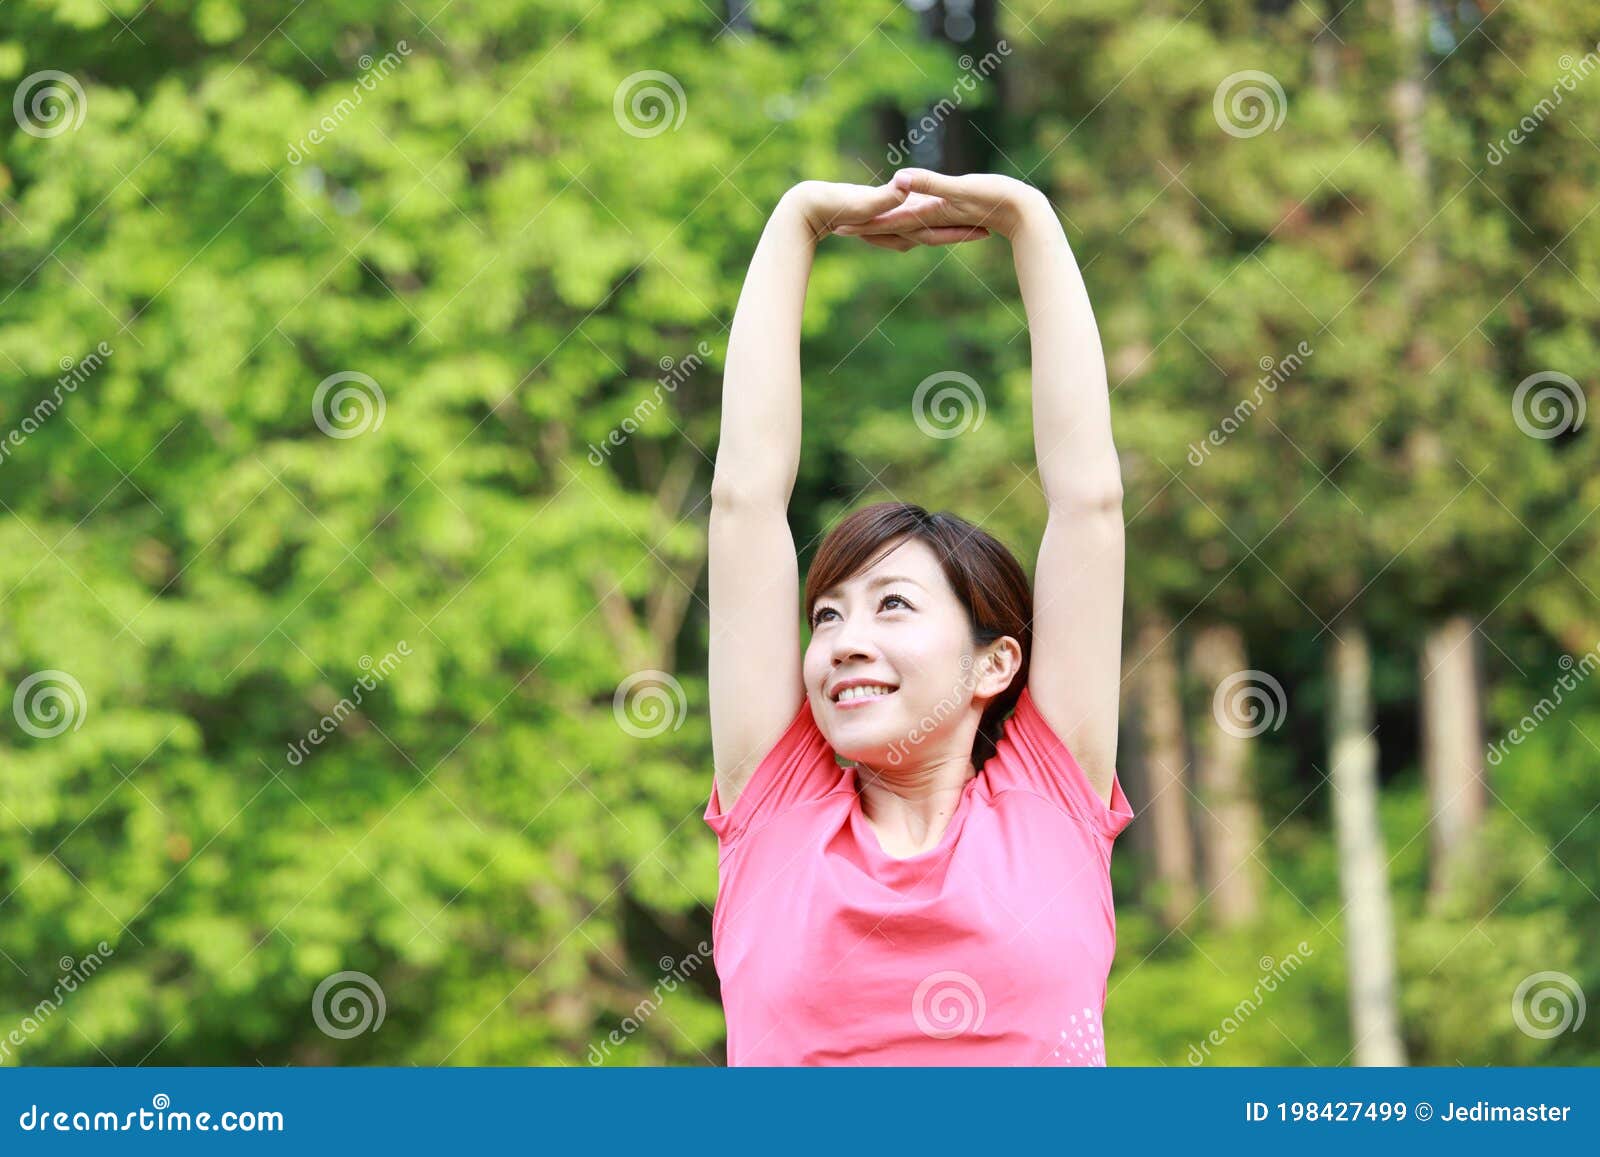 Japanese Woman Outside Doing Stretches Exercise Stock Image - Image of ...